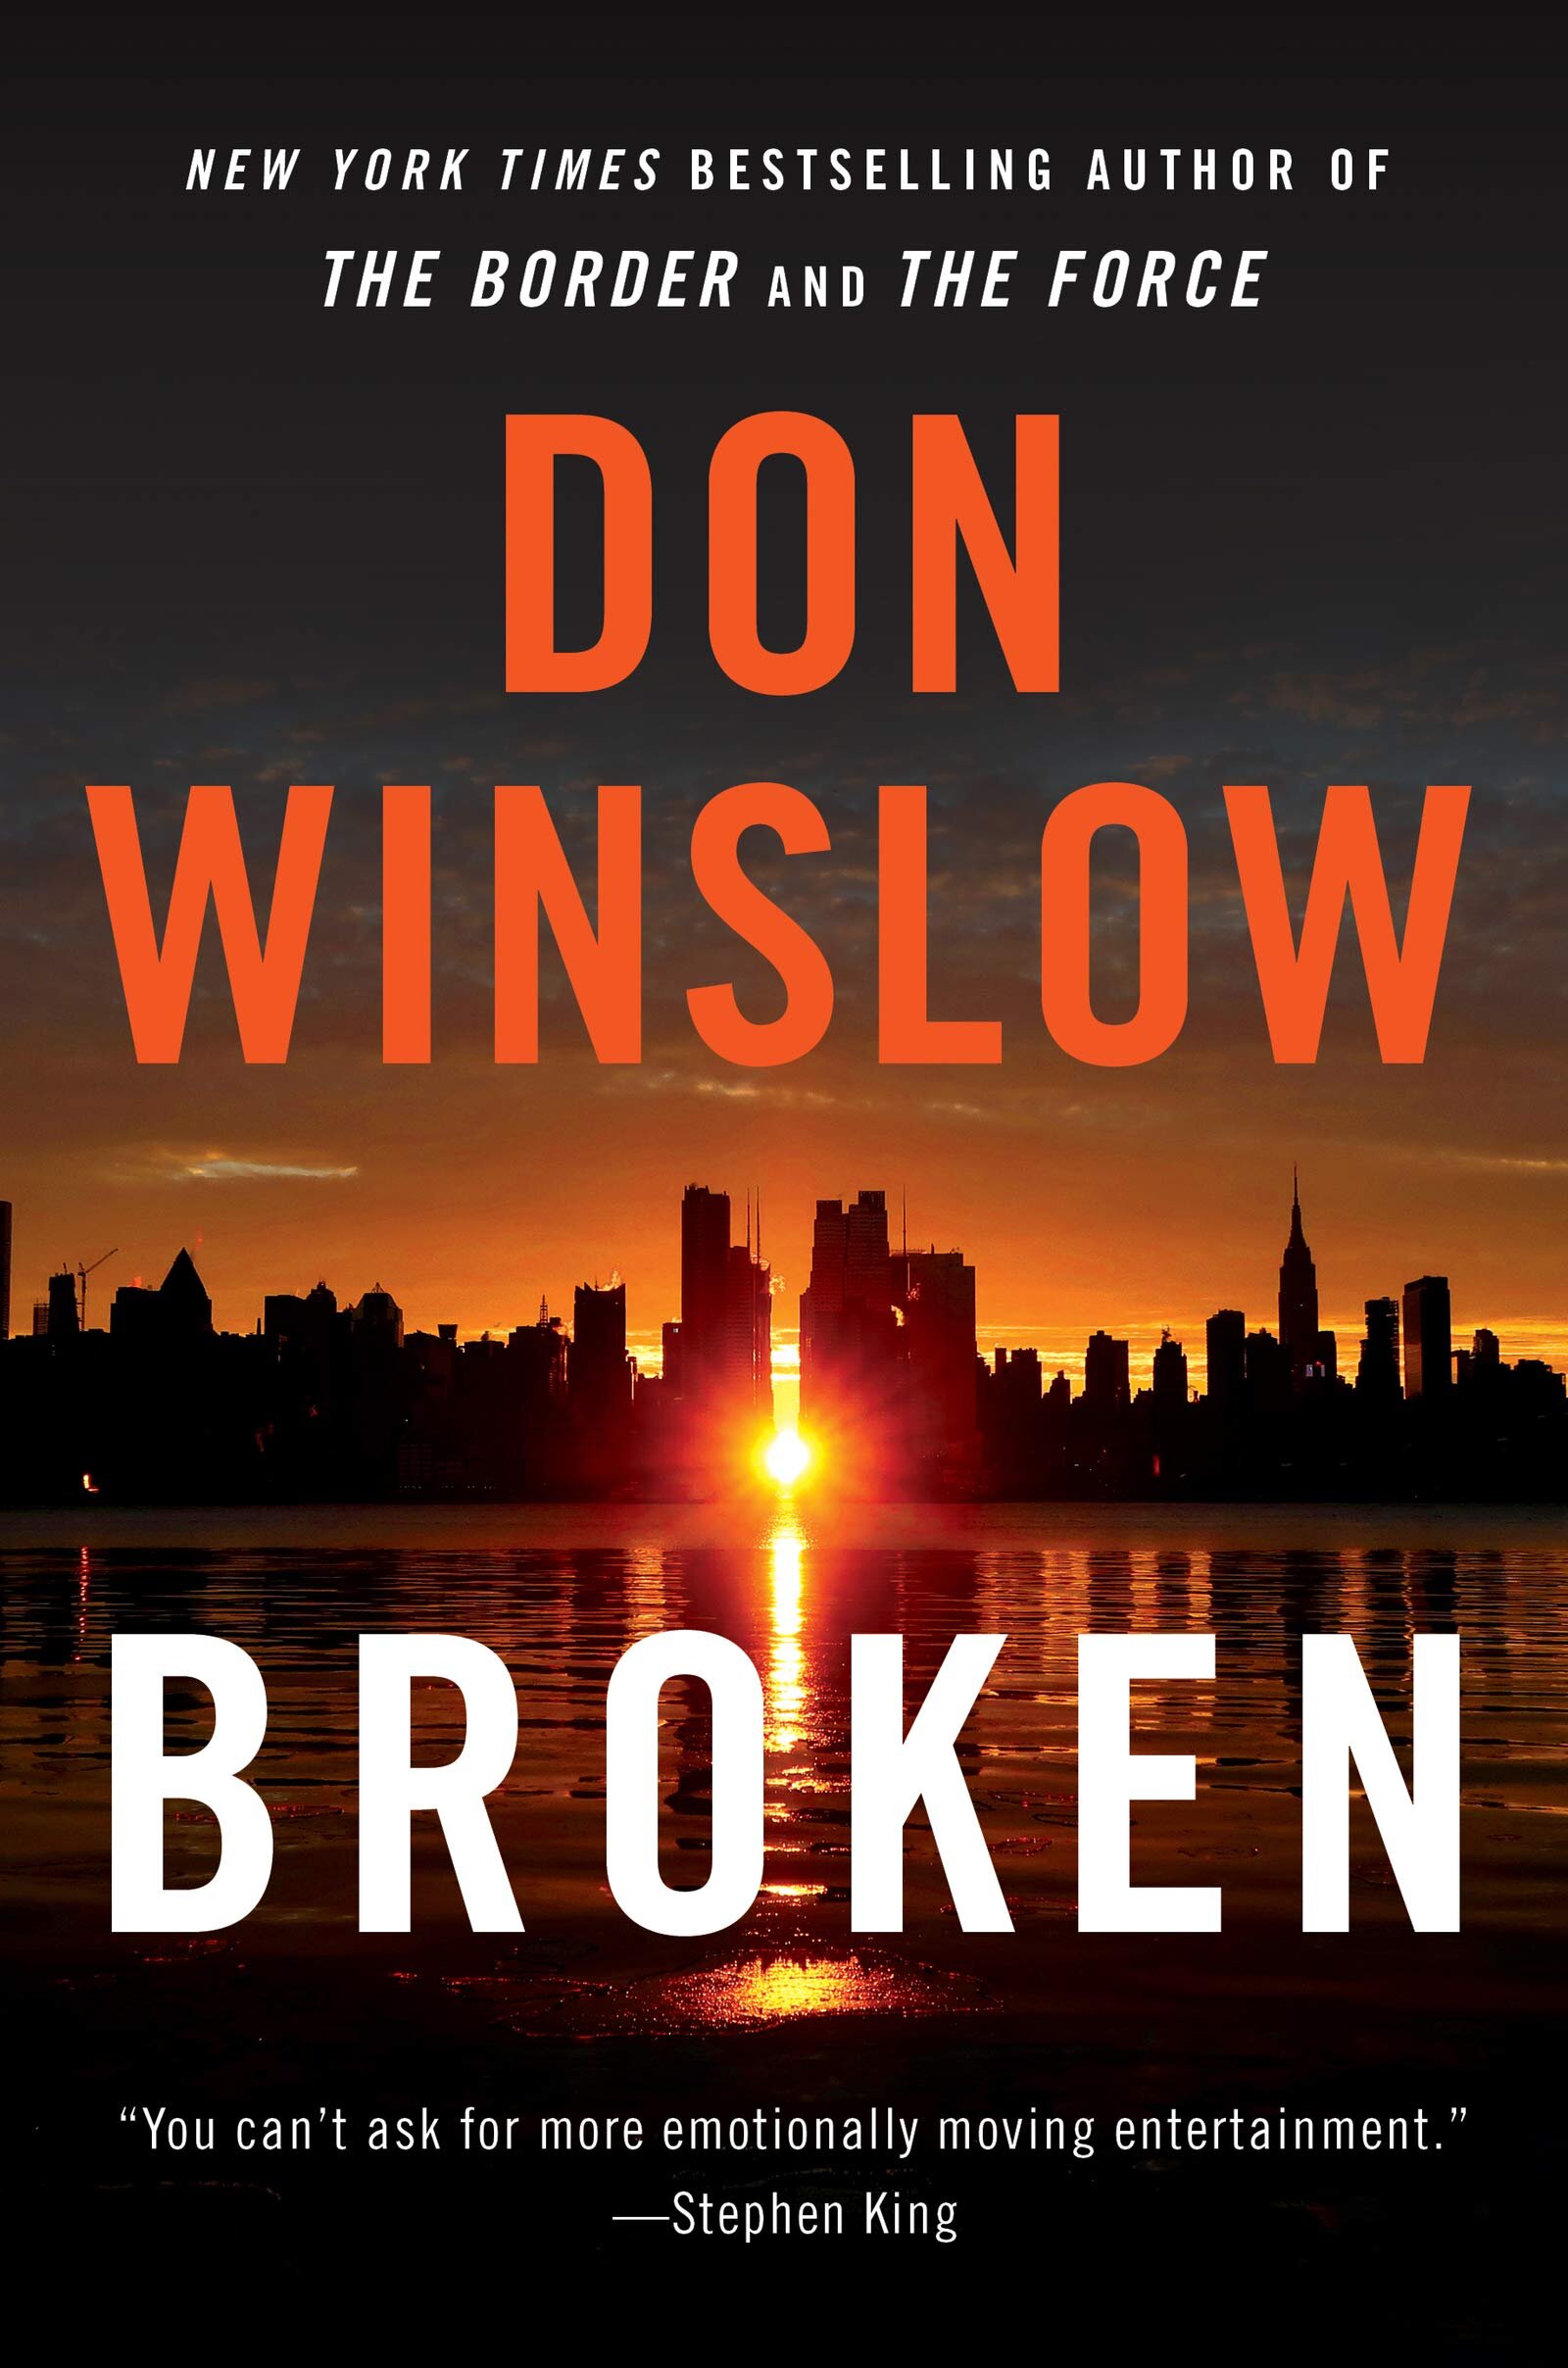 Broken by Don Winslow — Open Letters Review